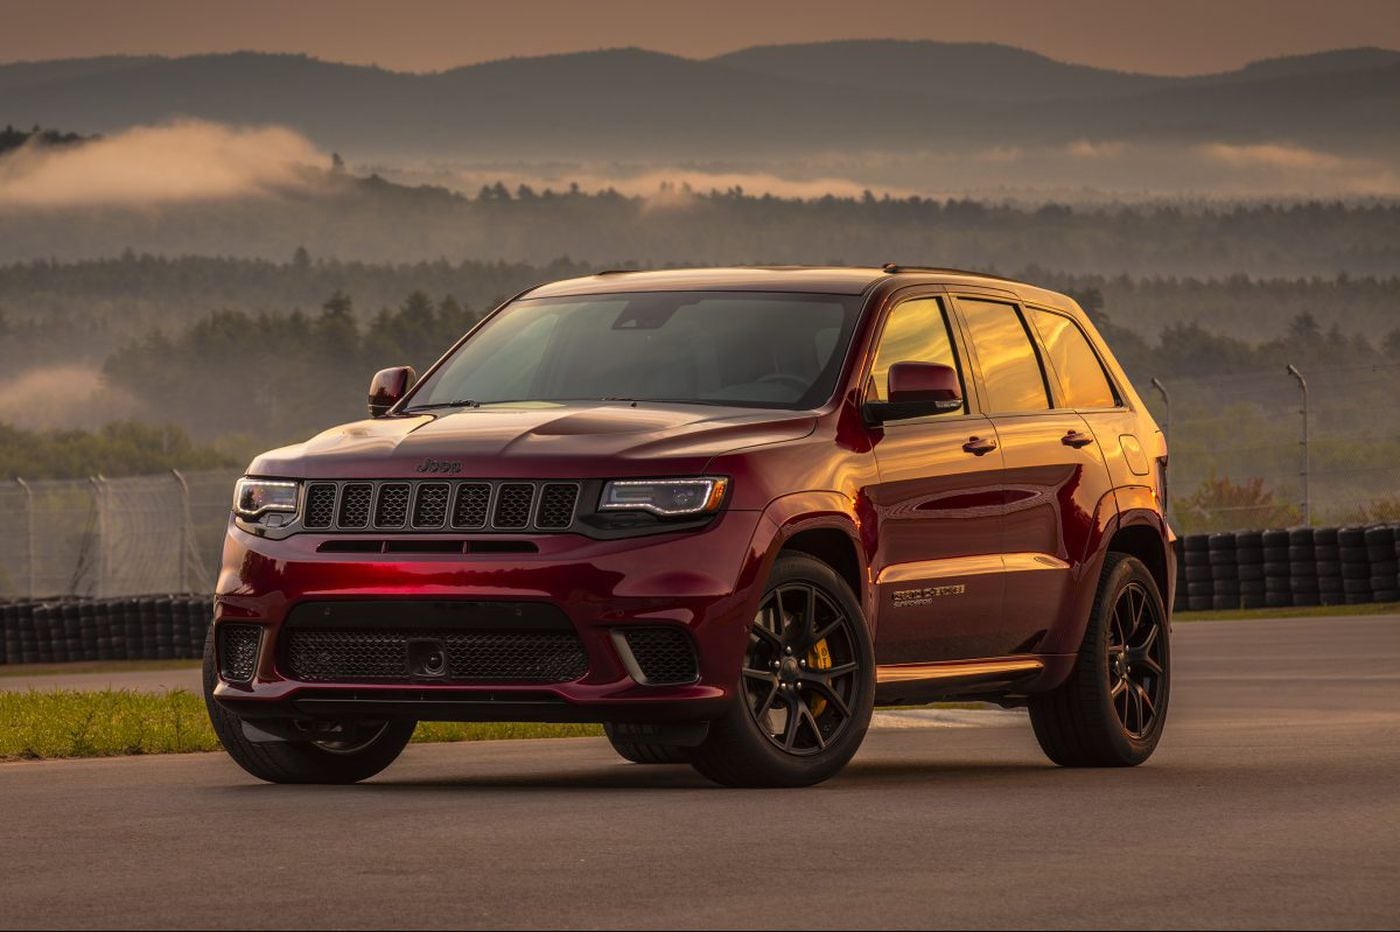 2018 Jeep Grand Cherokee Trackhawk: A supercharged pleasure to drive